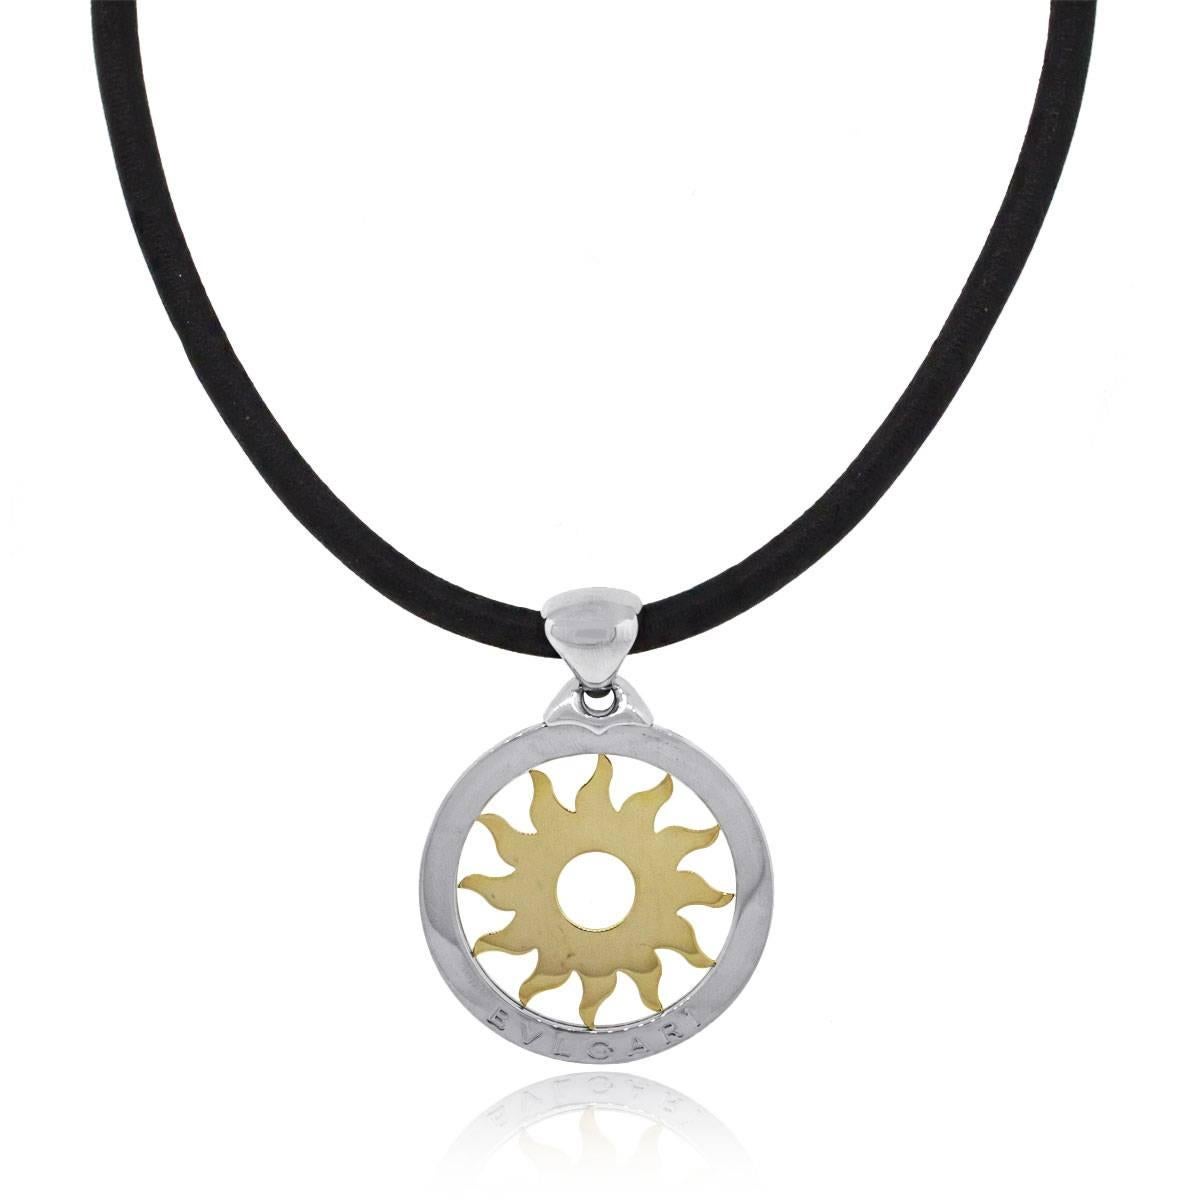 Designer: Bvlgari
Material: 18k yellow gold and sterling silver, leather necklace
Pendant Size: 1.75″ x 0.10″ x 1.75″
Measurements: 15.50
Total Weight: 37.7g (24.2dwt)
Additional Details: This item comes with Bvlgari presentation box!
SKU: G6860